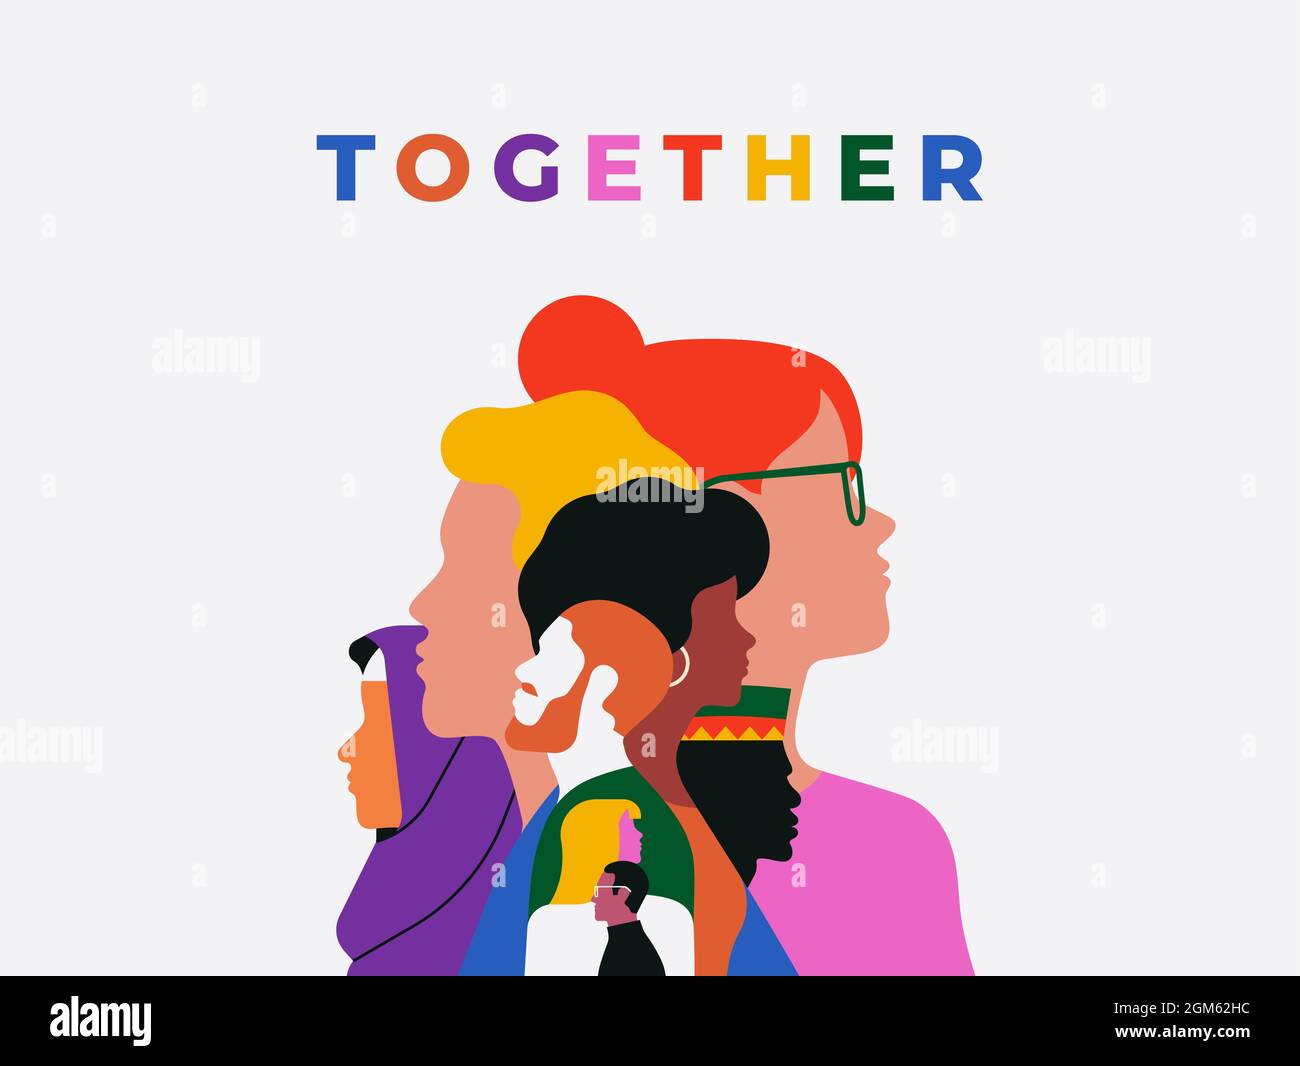 Together colorful quote illustration with diverse people faces. Ethnic character team flat cartoon design for unity or community help concept. Stock Vector